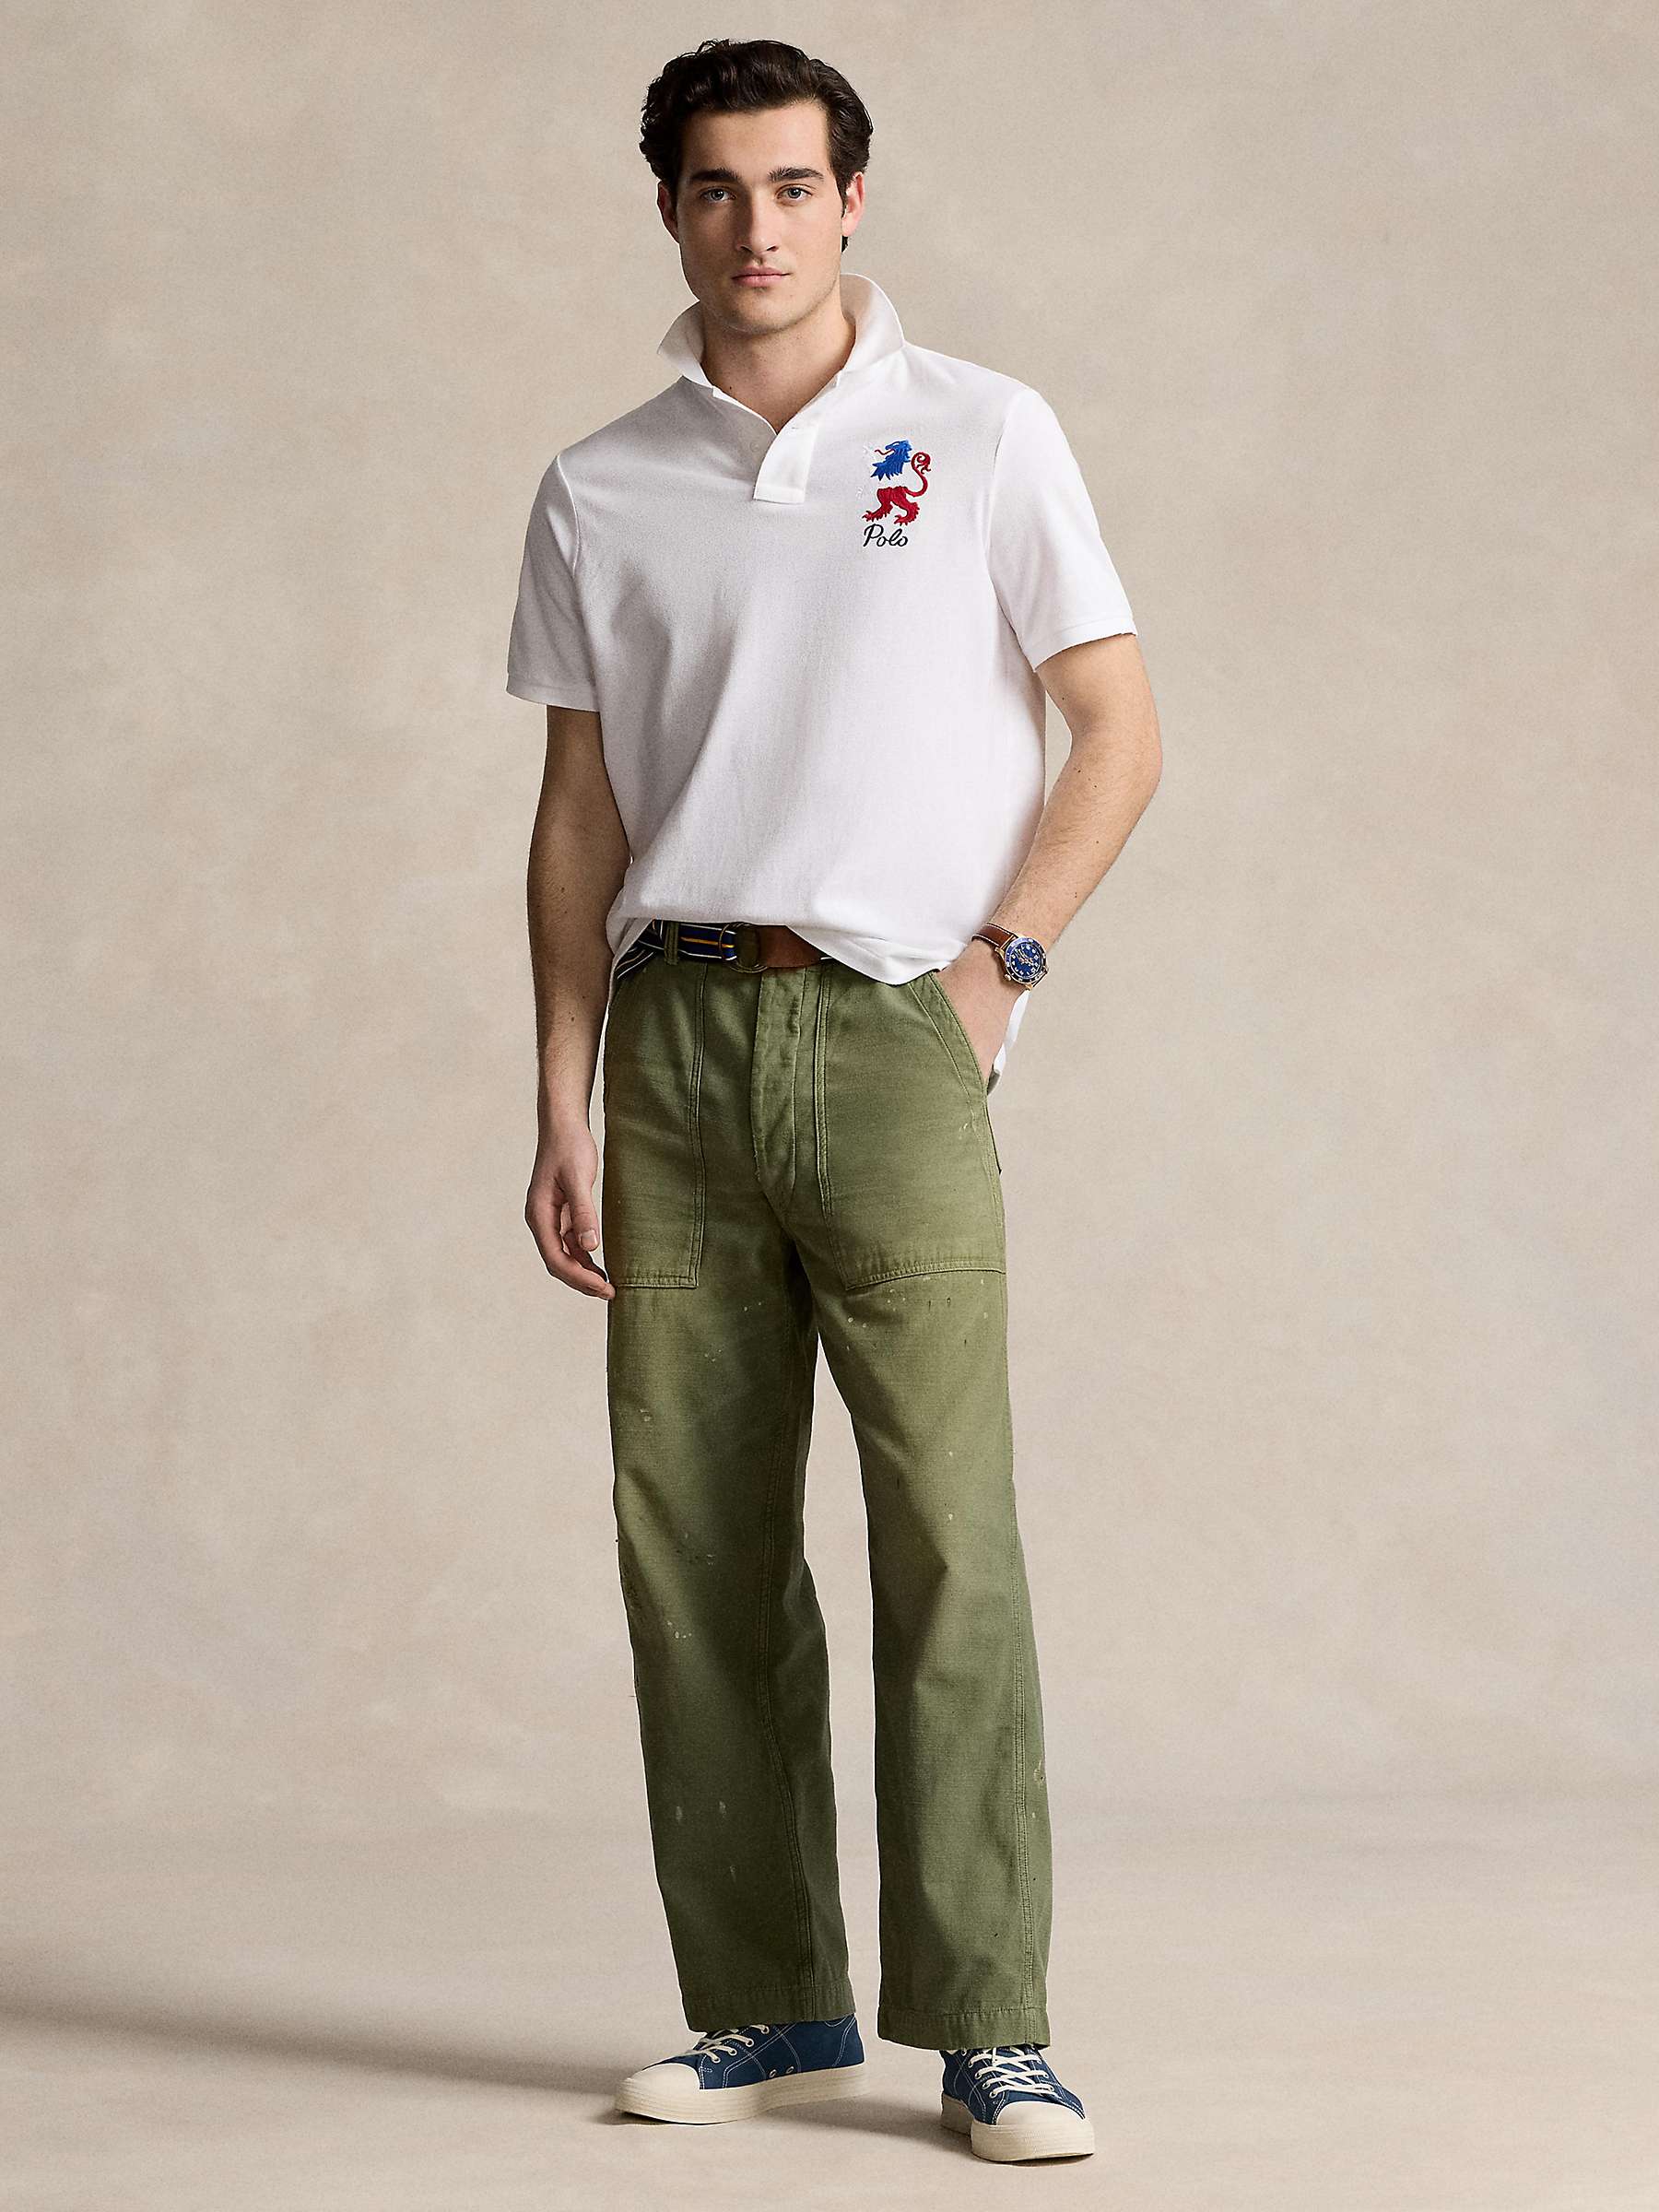 Buy Ralph Lauren Classic Fit Embroidered Mesh Polo Shirt, White Online at johnlewis.com